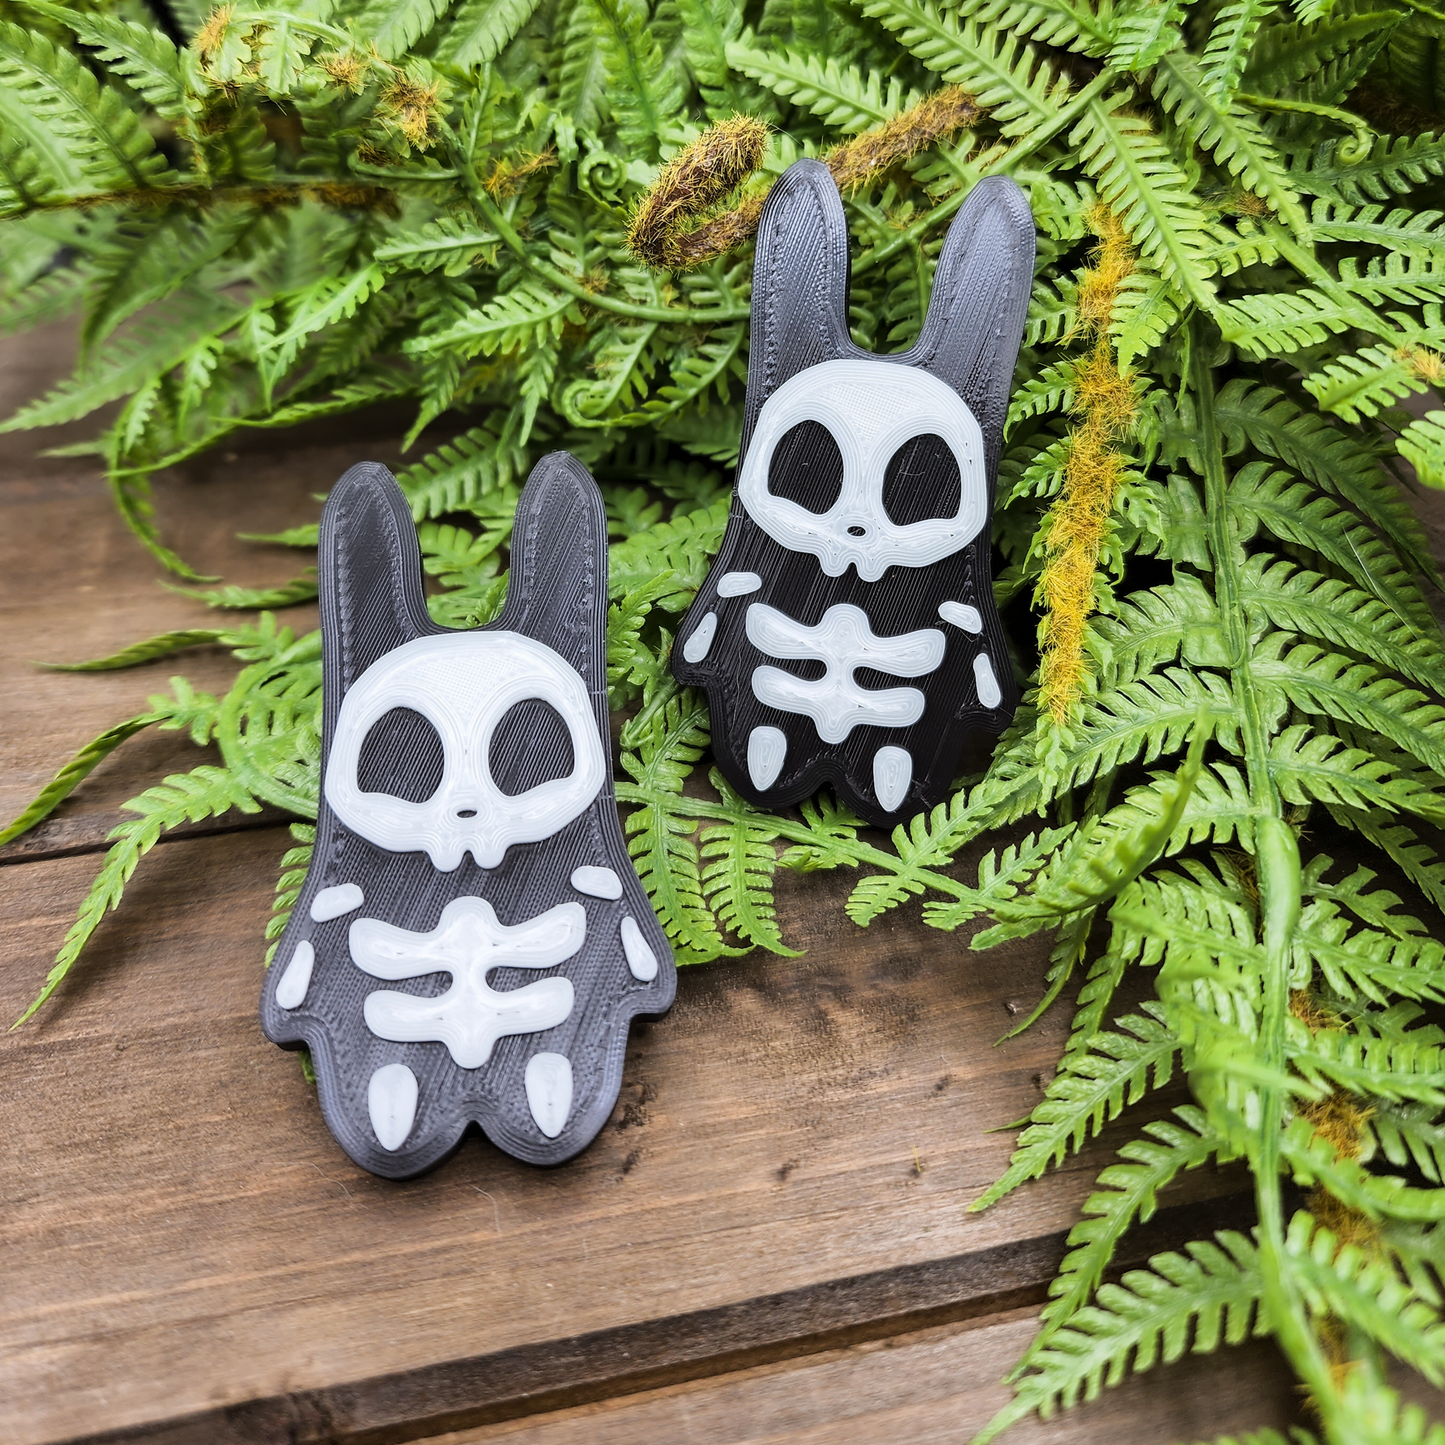 Spooky Halloween Skeleton Keychains and Magnets